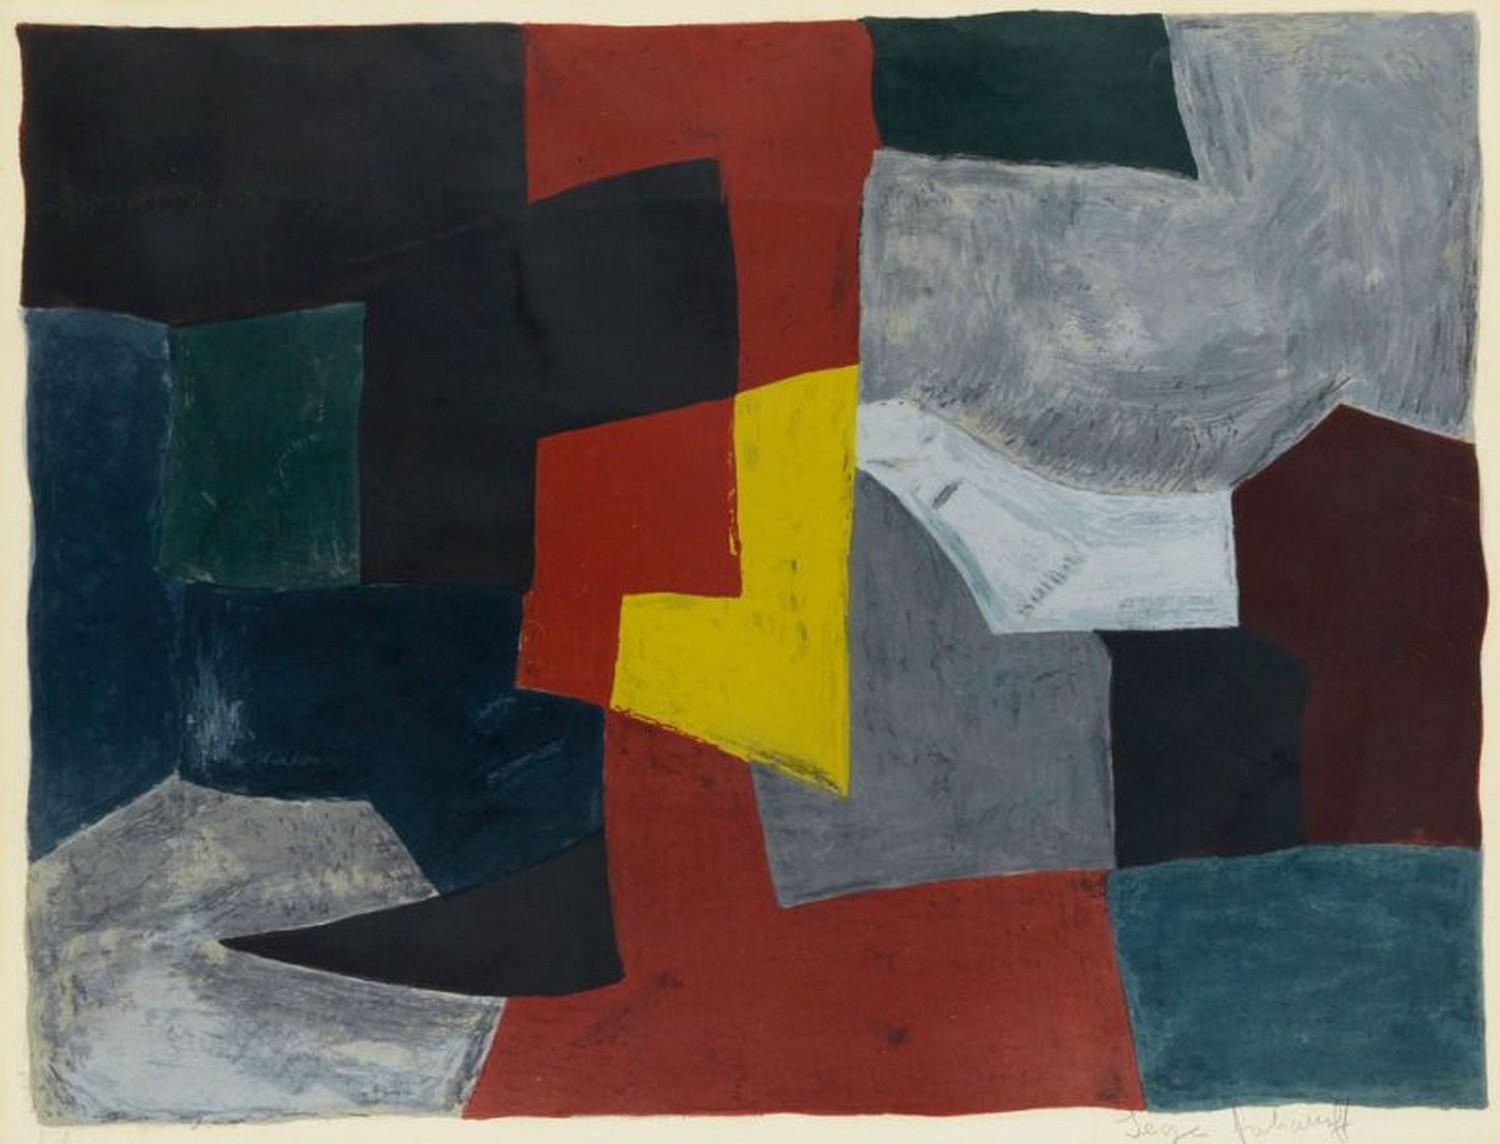 Abstract Print Serge Poliakoff - Composition gris, rouge et jaune L27